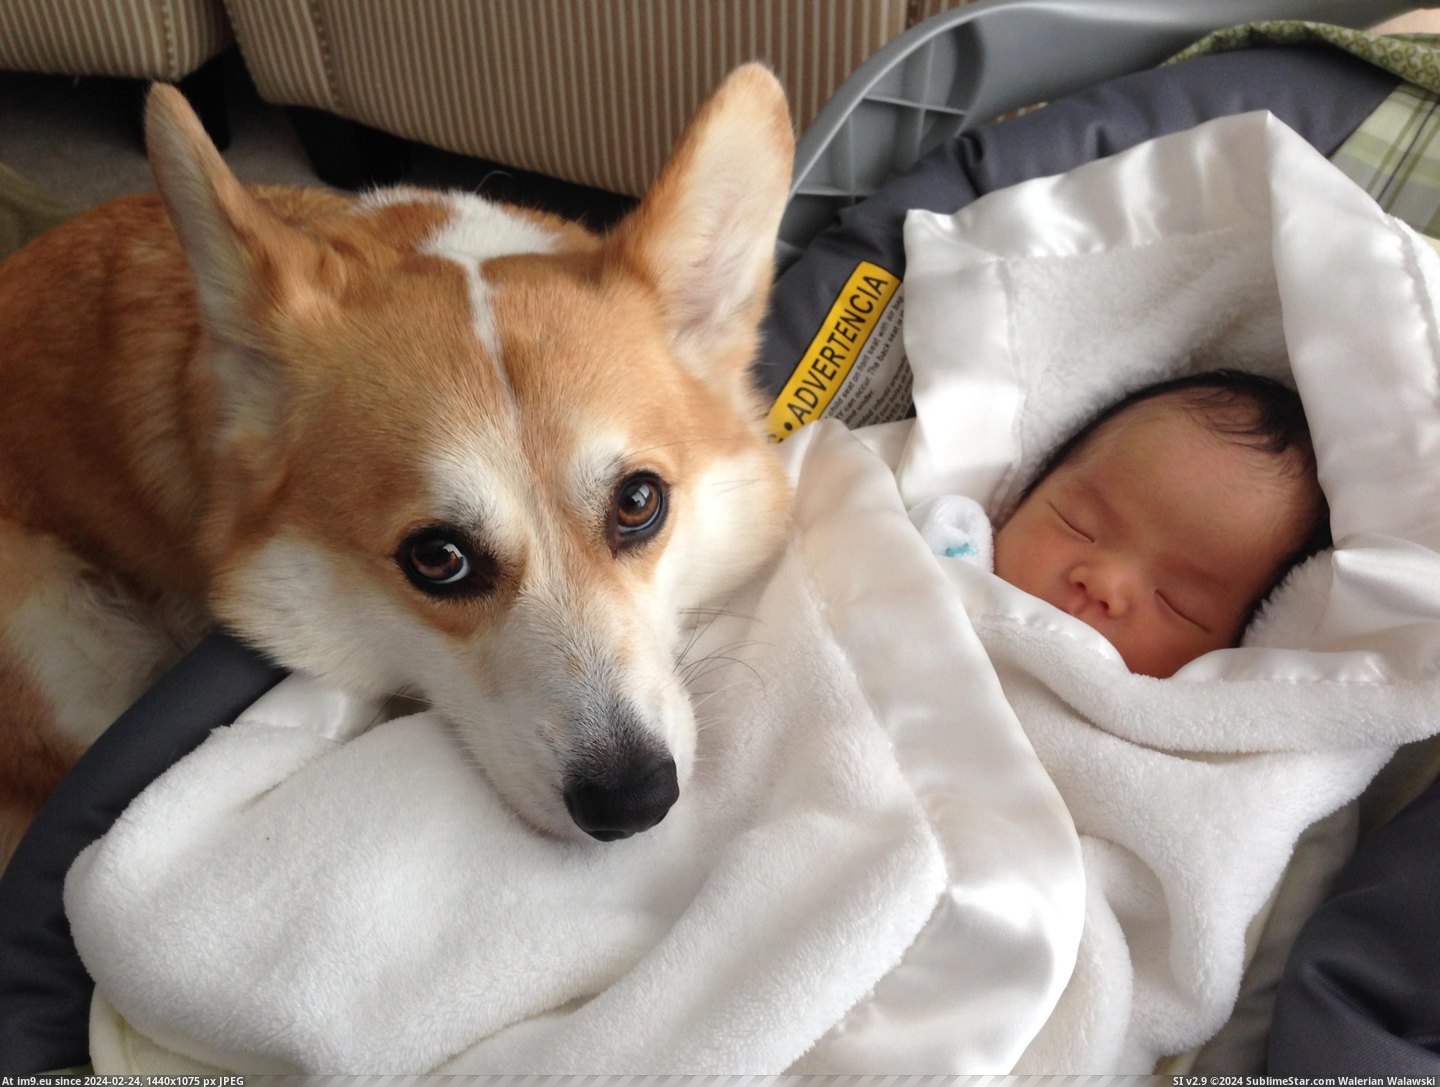 #Was #New #Ago #But #How #Daughter #Weeks #Born [Aww] My daughter was born three weeks ago. I worried about how my corgi would react but he's treating her like his new BFF... 1 Pic. (Image of album My r/AWW favs))